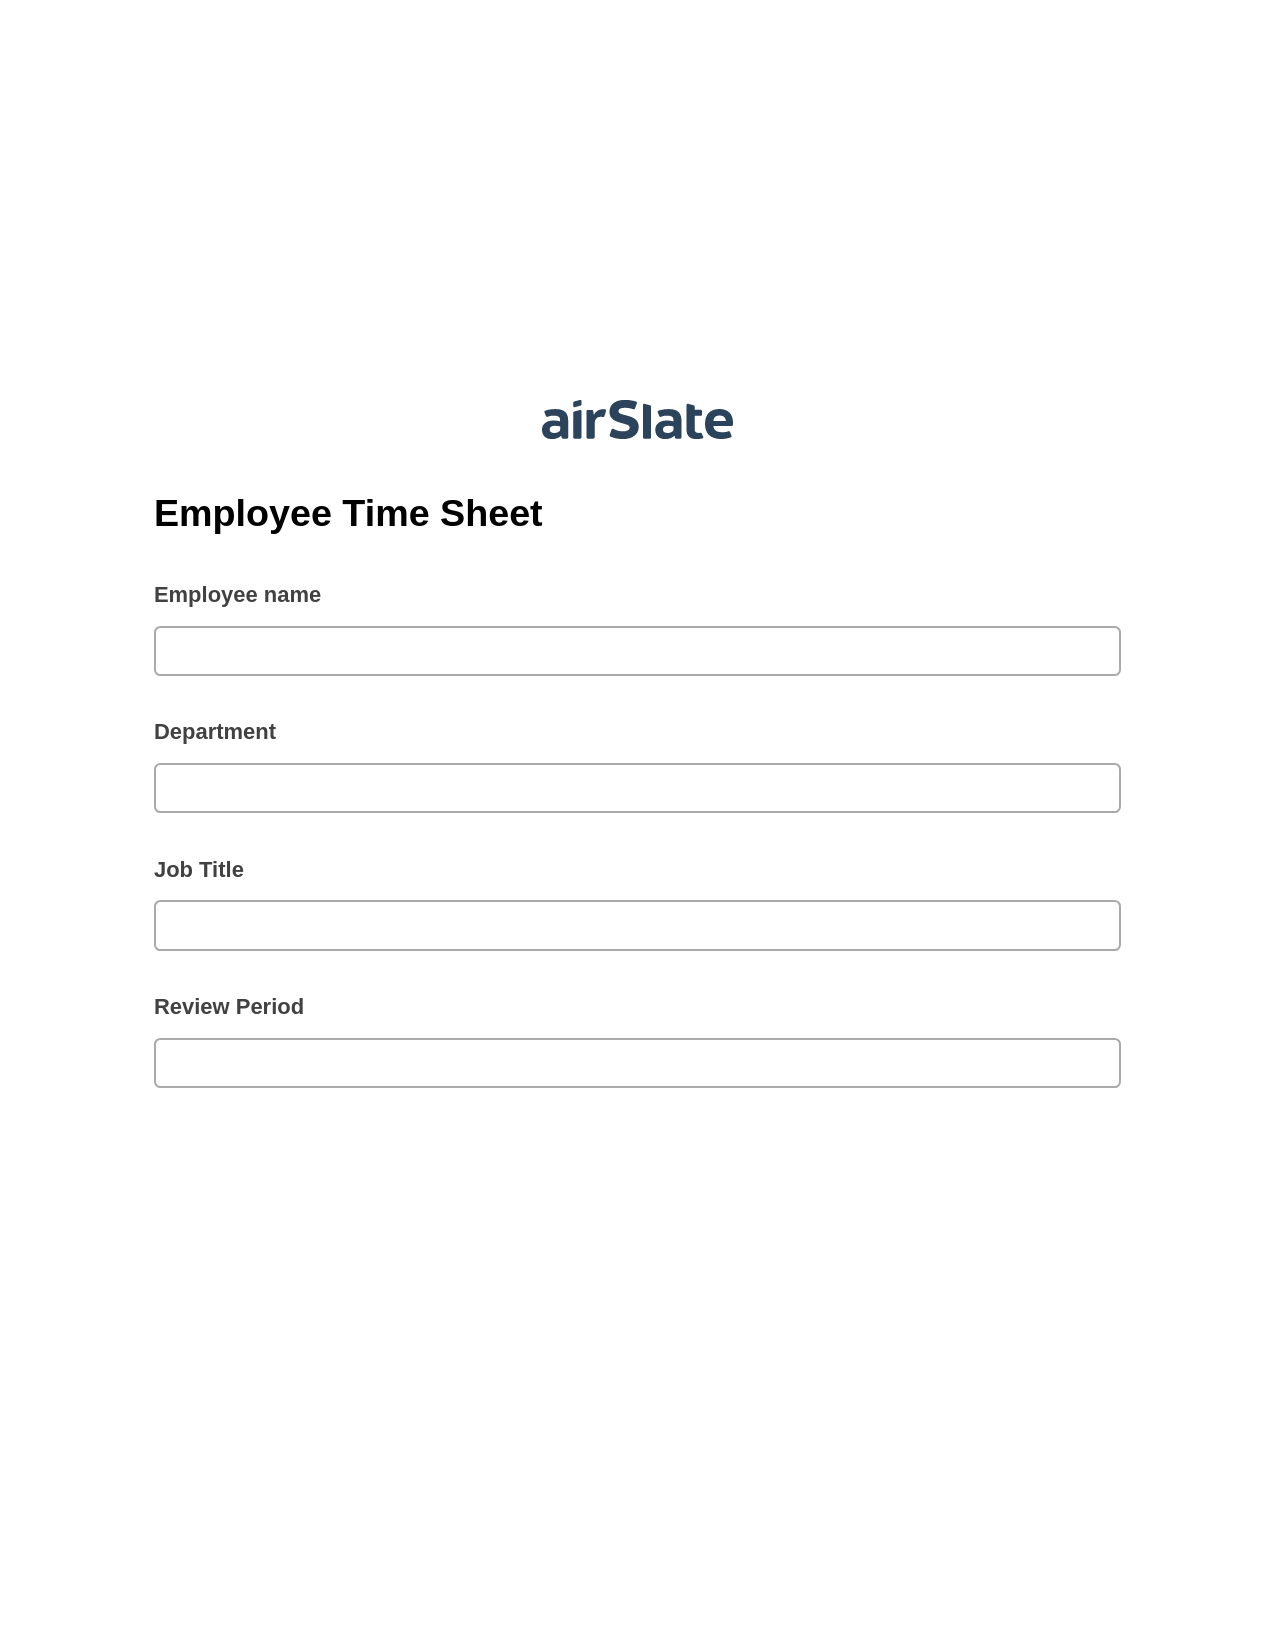 Multirole Employee Time Sheet Pre-fill from Google Sheets Bot, Create Salesforce Records Bot, Post-finish Document Bot